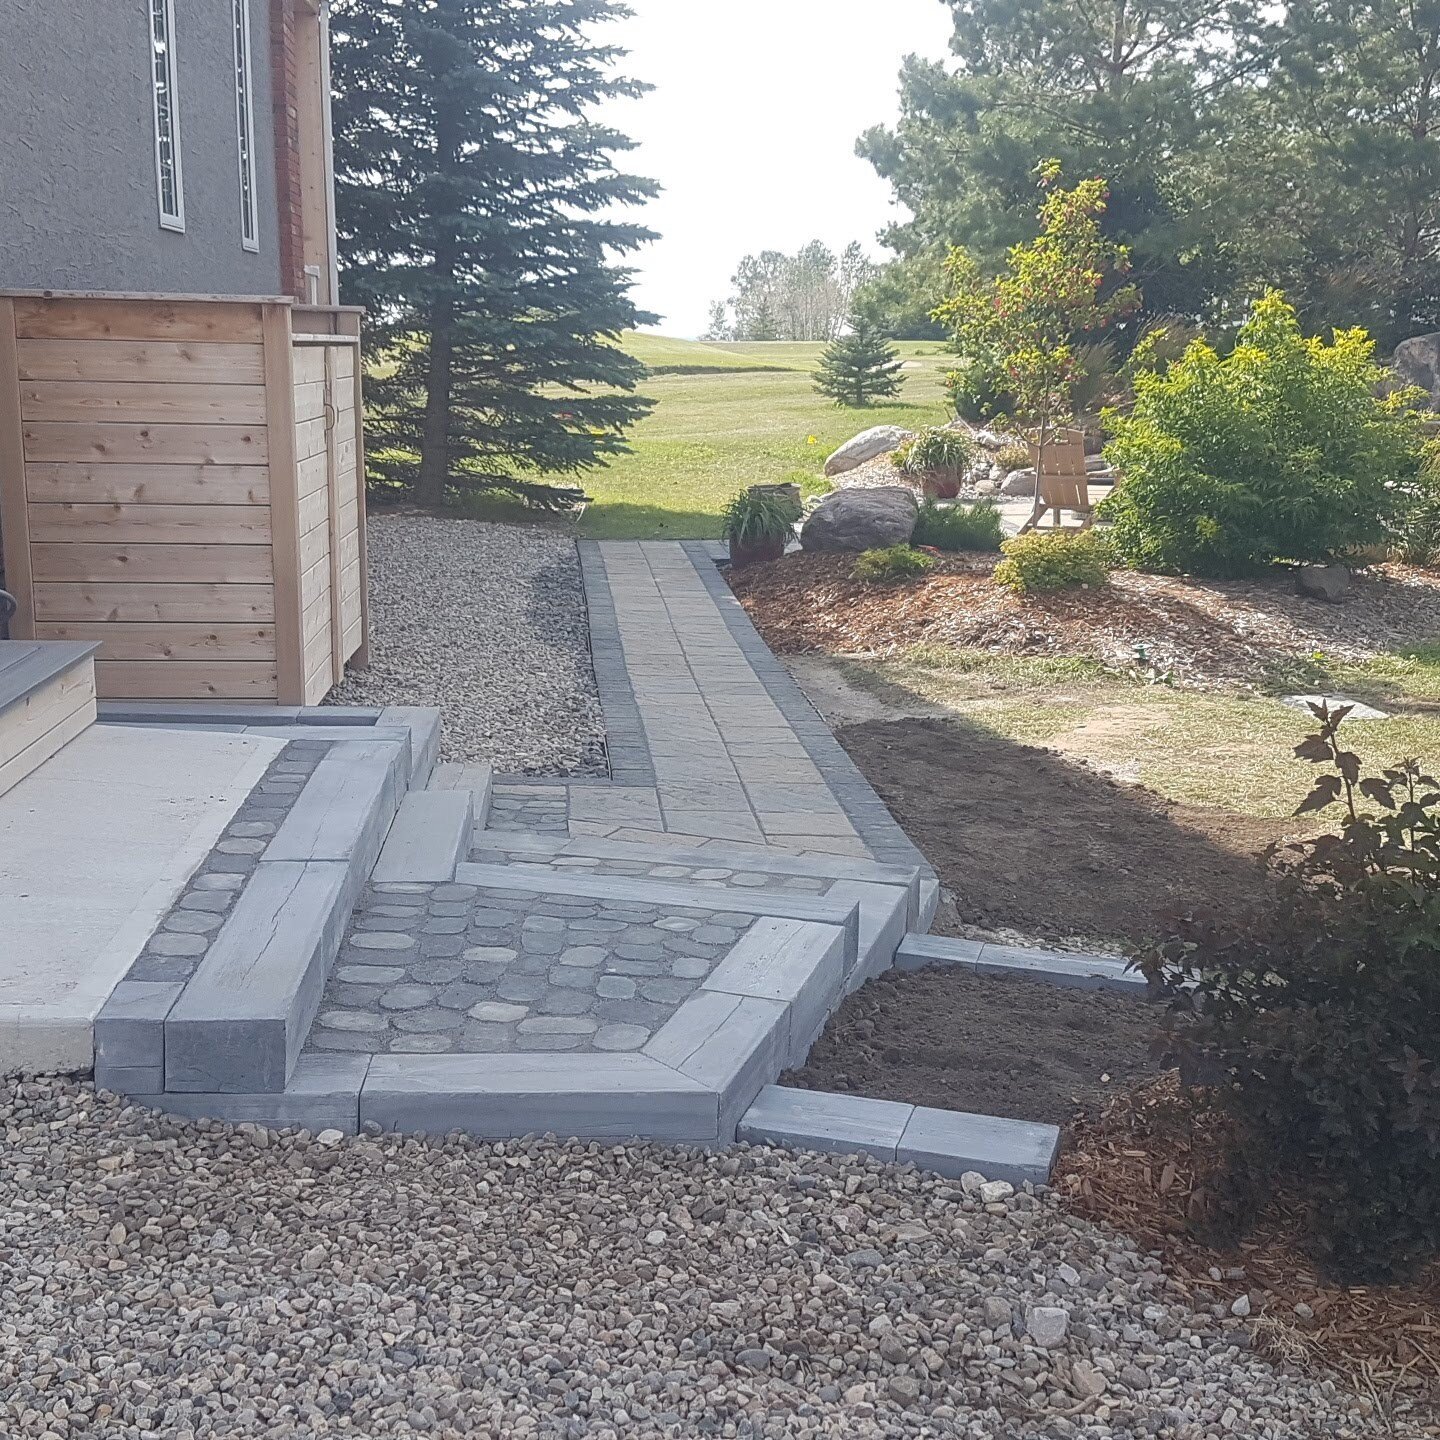 Added steps and a walkway to allow easier access to existing paving stone patio. 
#barkmanconcrete #bridgewood #techoblocpavers #antika